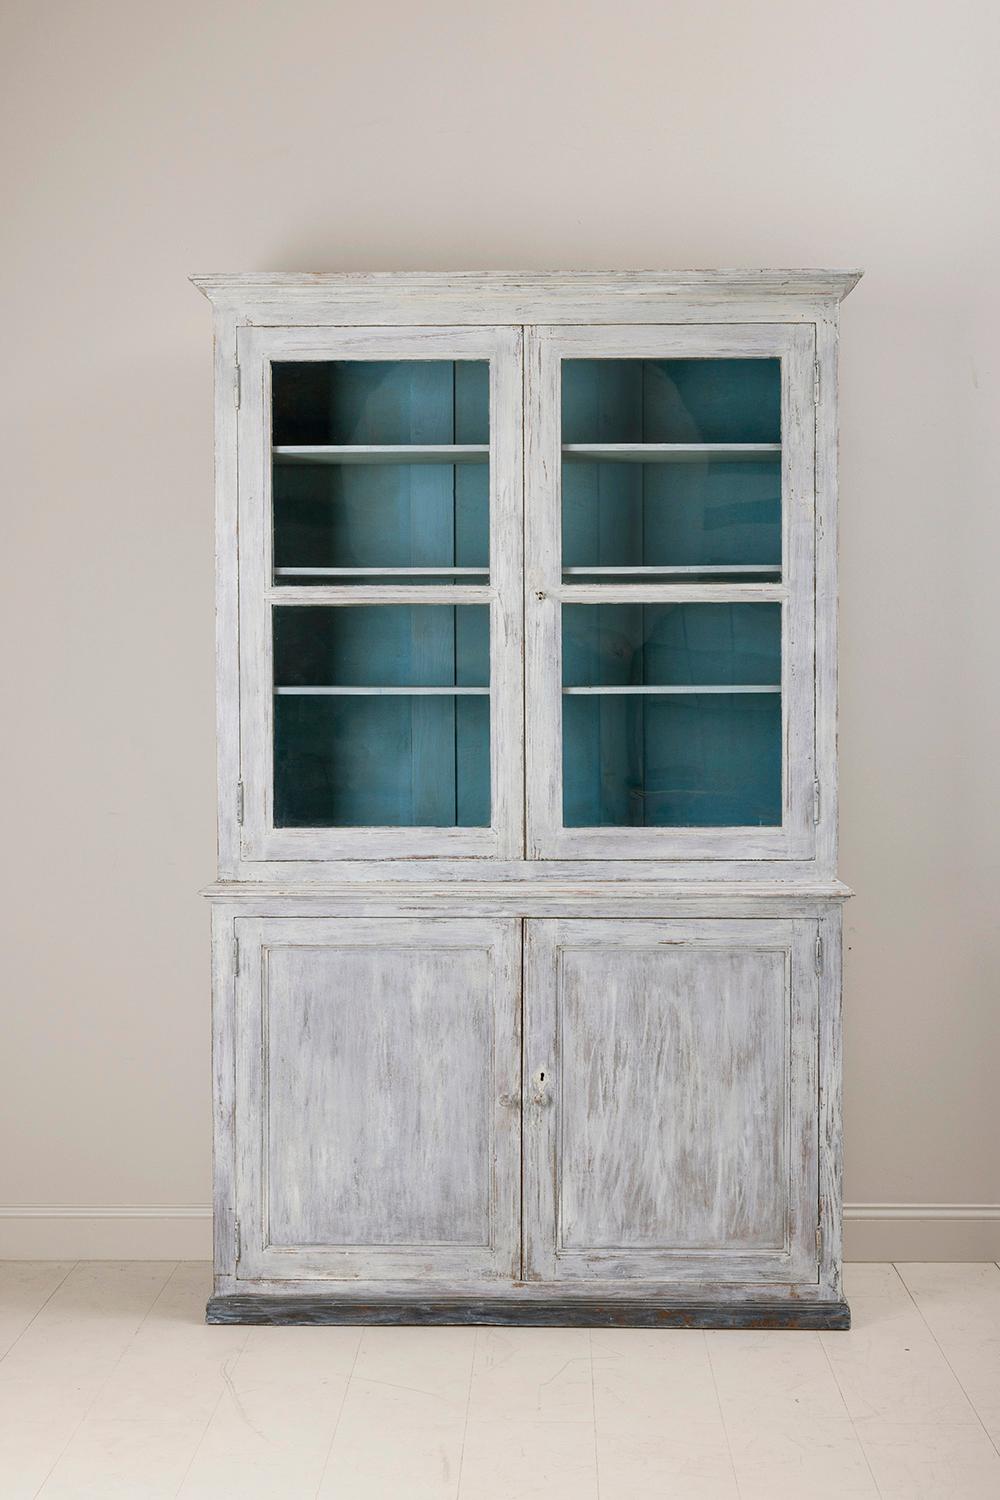 A 19th c. French bibliothèque in two parts with original glass and adjustable shelves. Found in Provence. This beautiful vitrine cabinet or bookcase is the perfect piece for almost any room. The exterior color is aged, soft gray. The interior is a